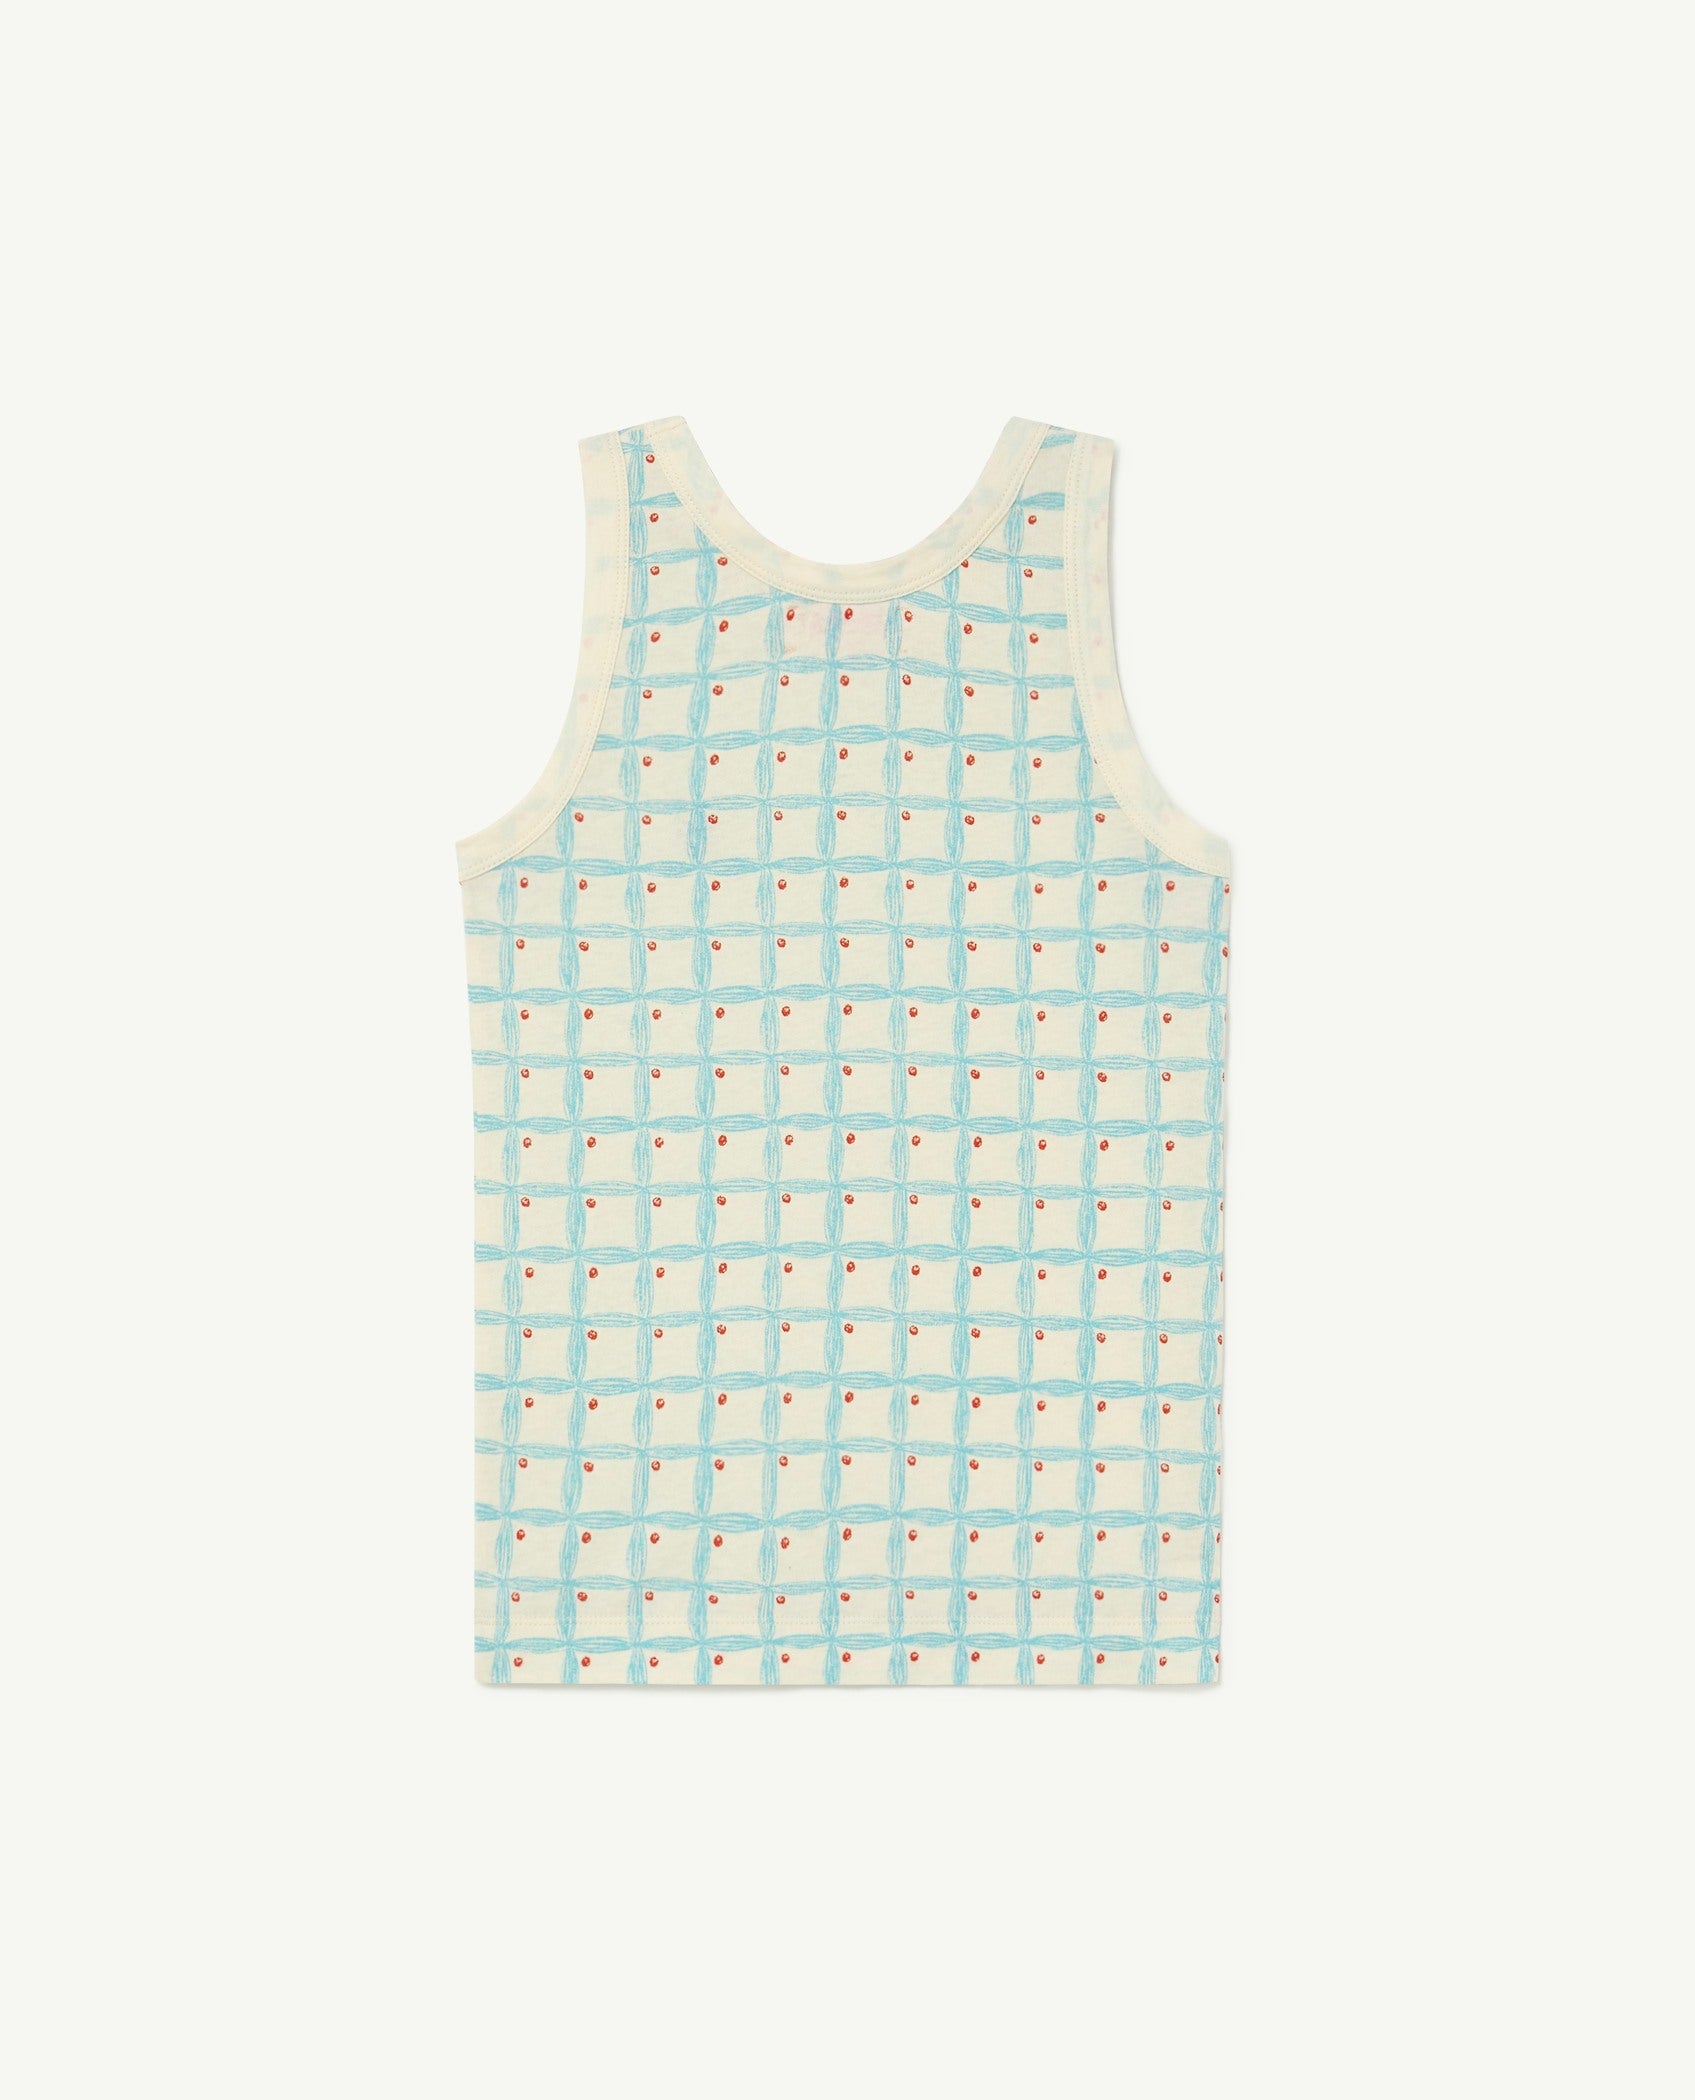 The Animals Observatory Frog Kids Tank Top - Am White